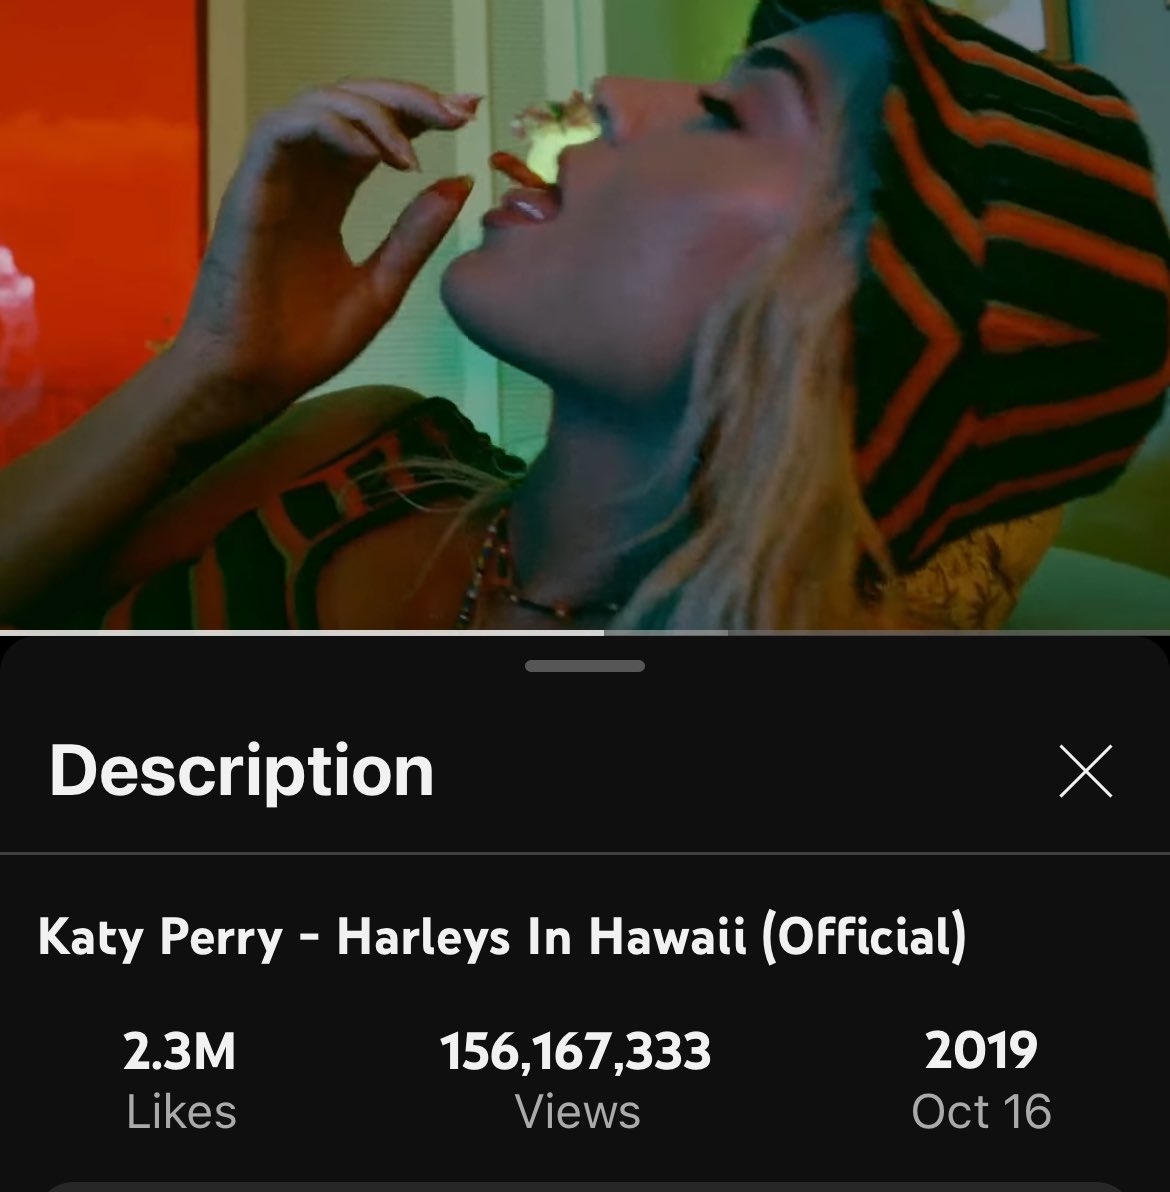 Harleys in hawaii has officially surpassed Never really over to become katy's highest viewed music video from the smile era